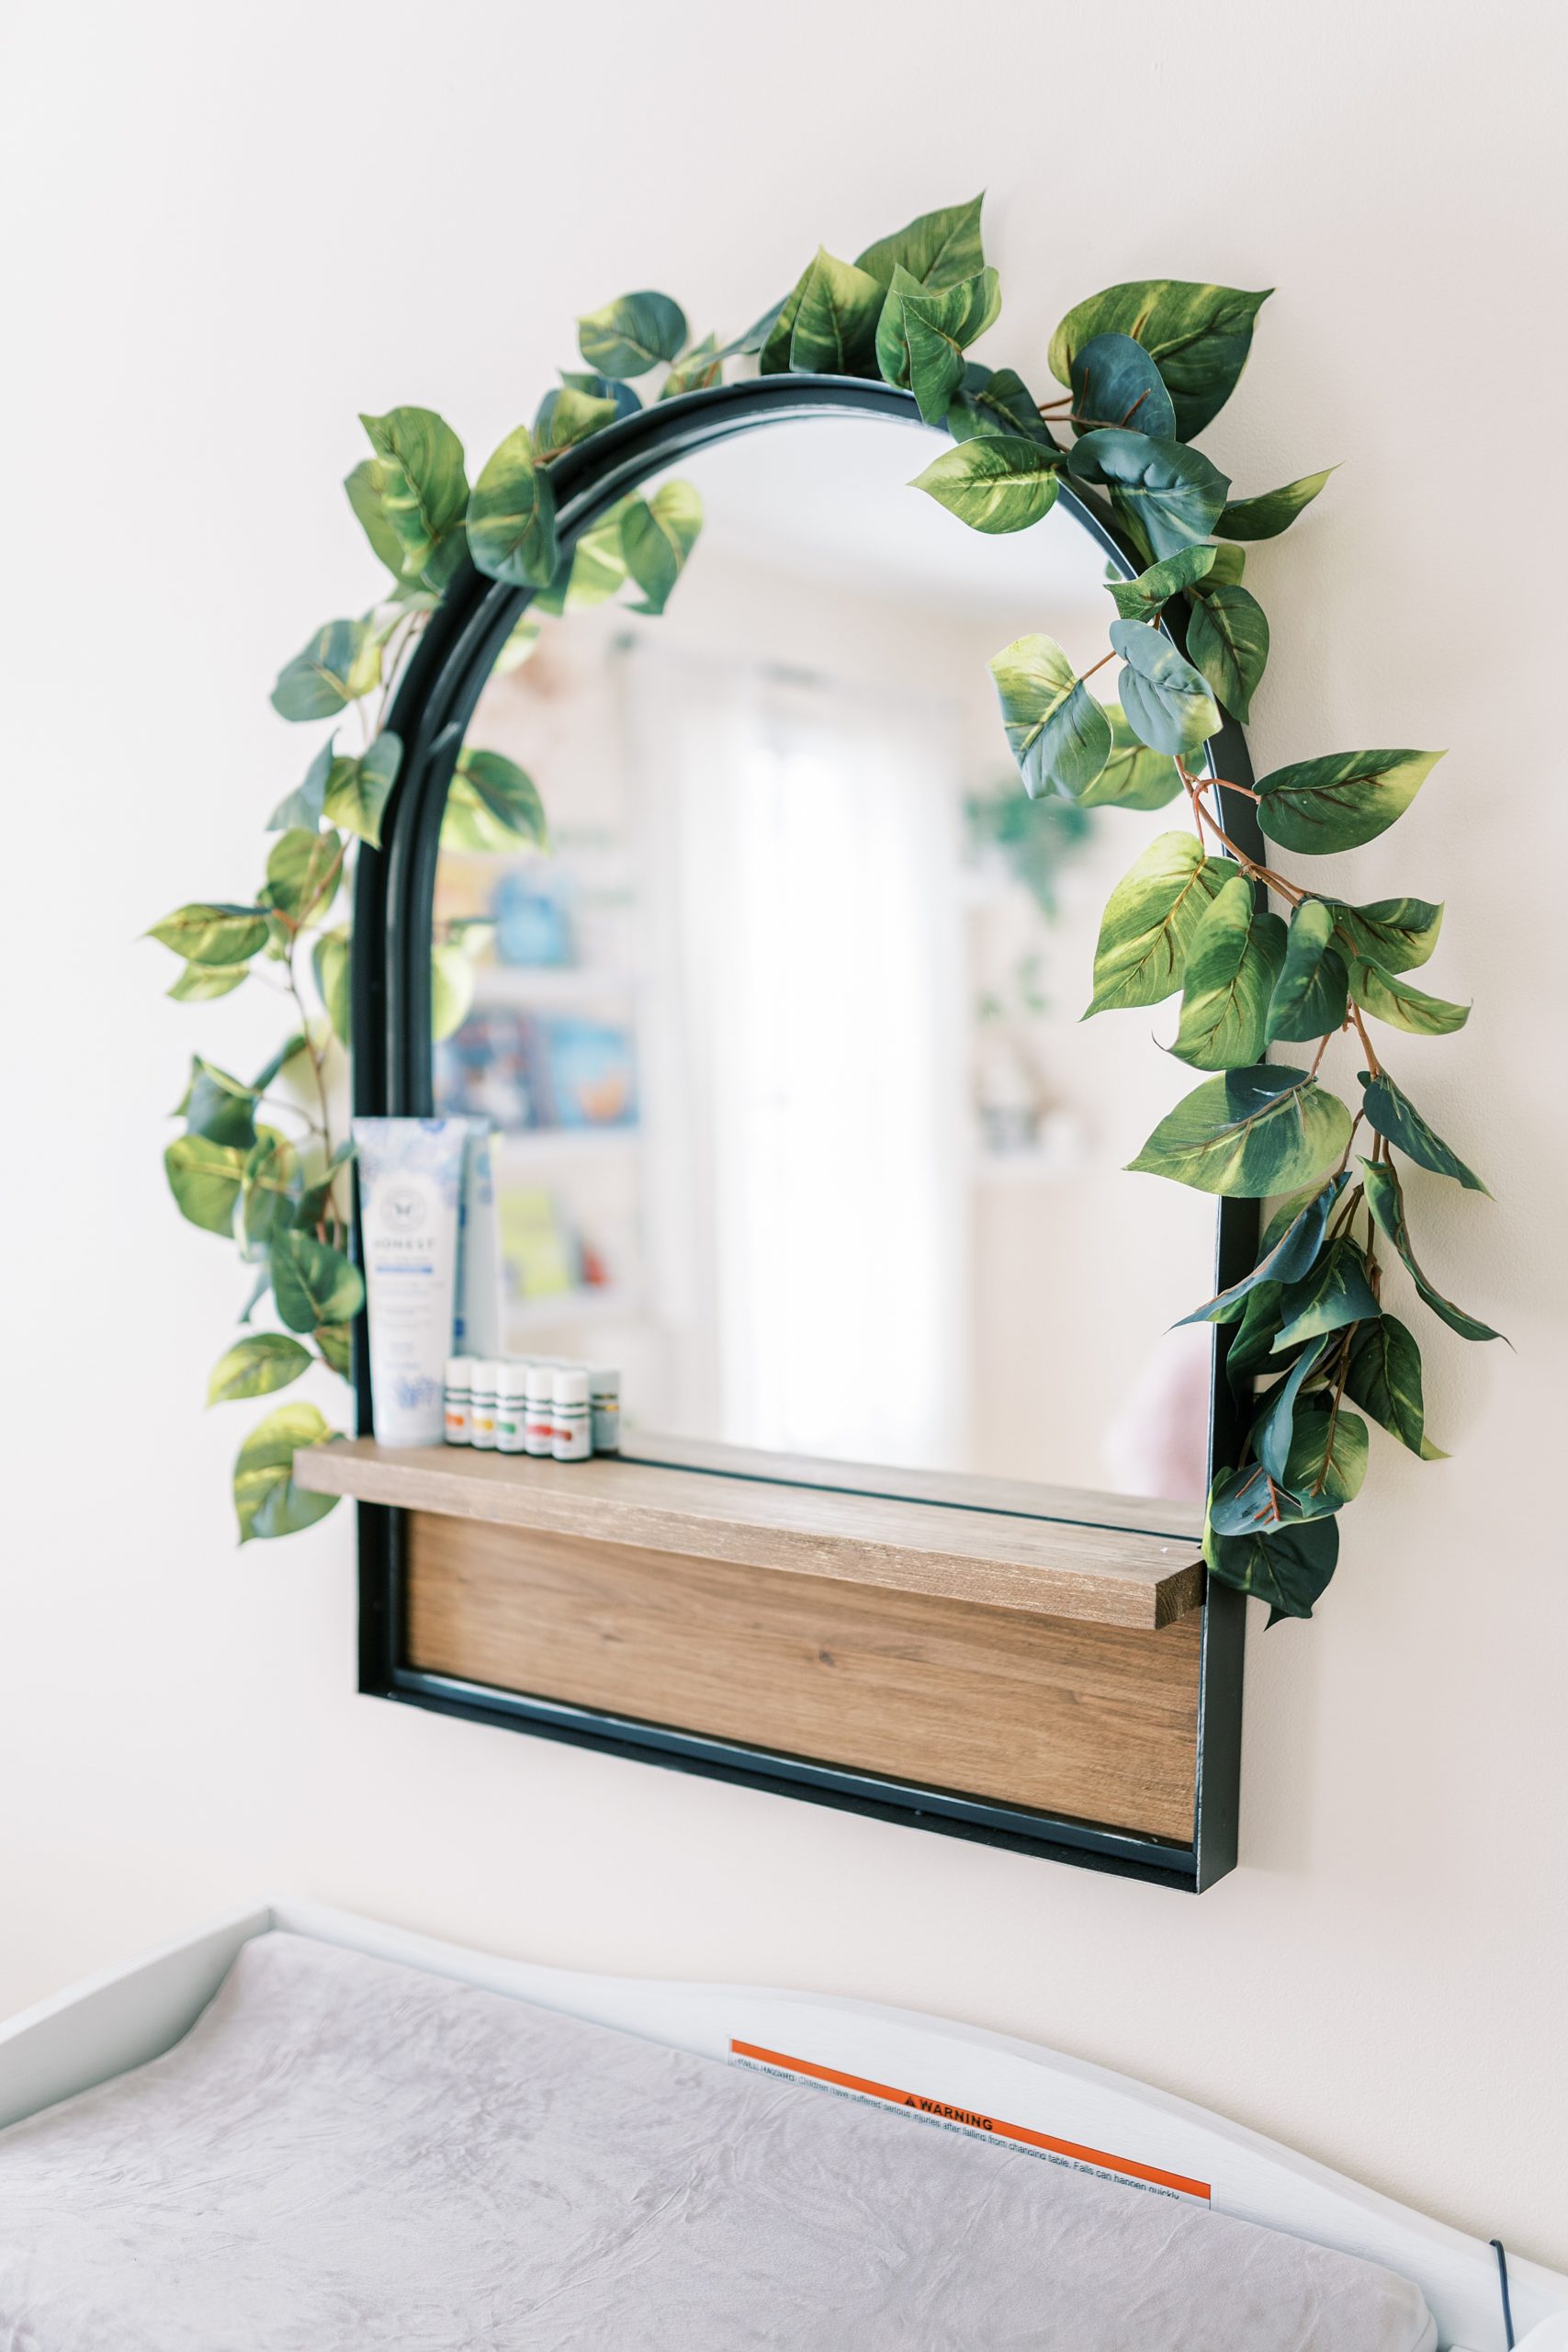 nursery decor-wall mounted mirror wrapped in green vine